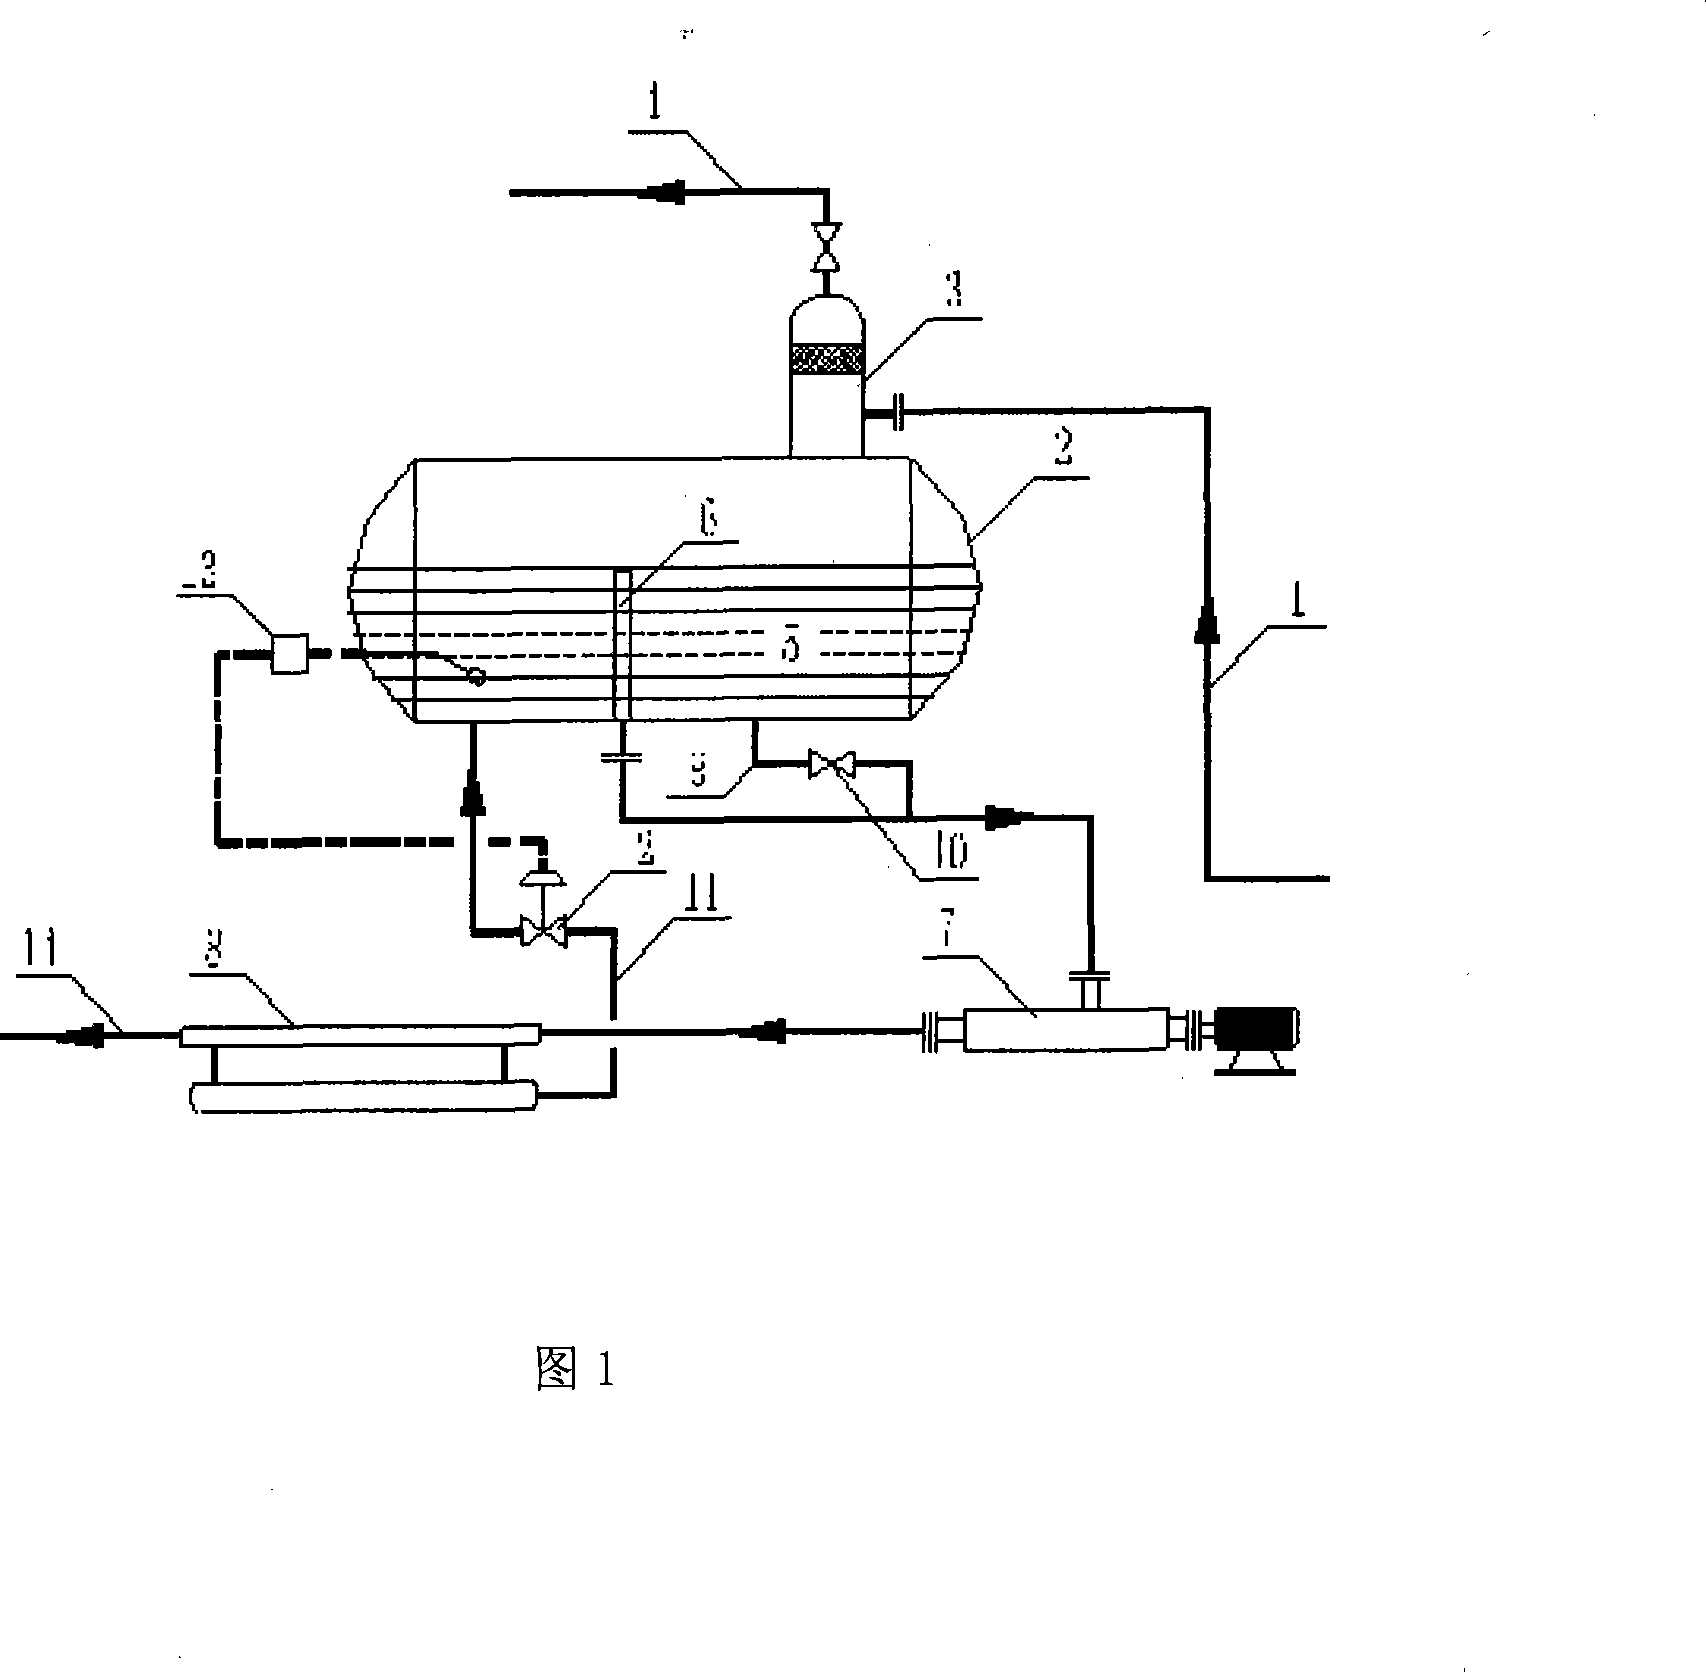 Oil-gas mixed flow technique for processing large segment plug flow in primary oil collecting and delivering process